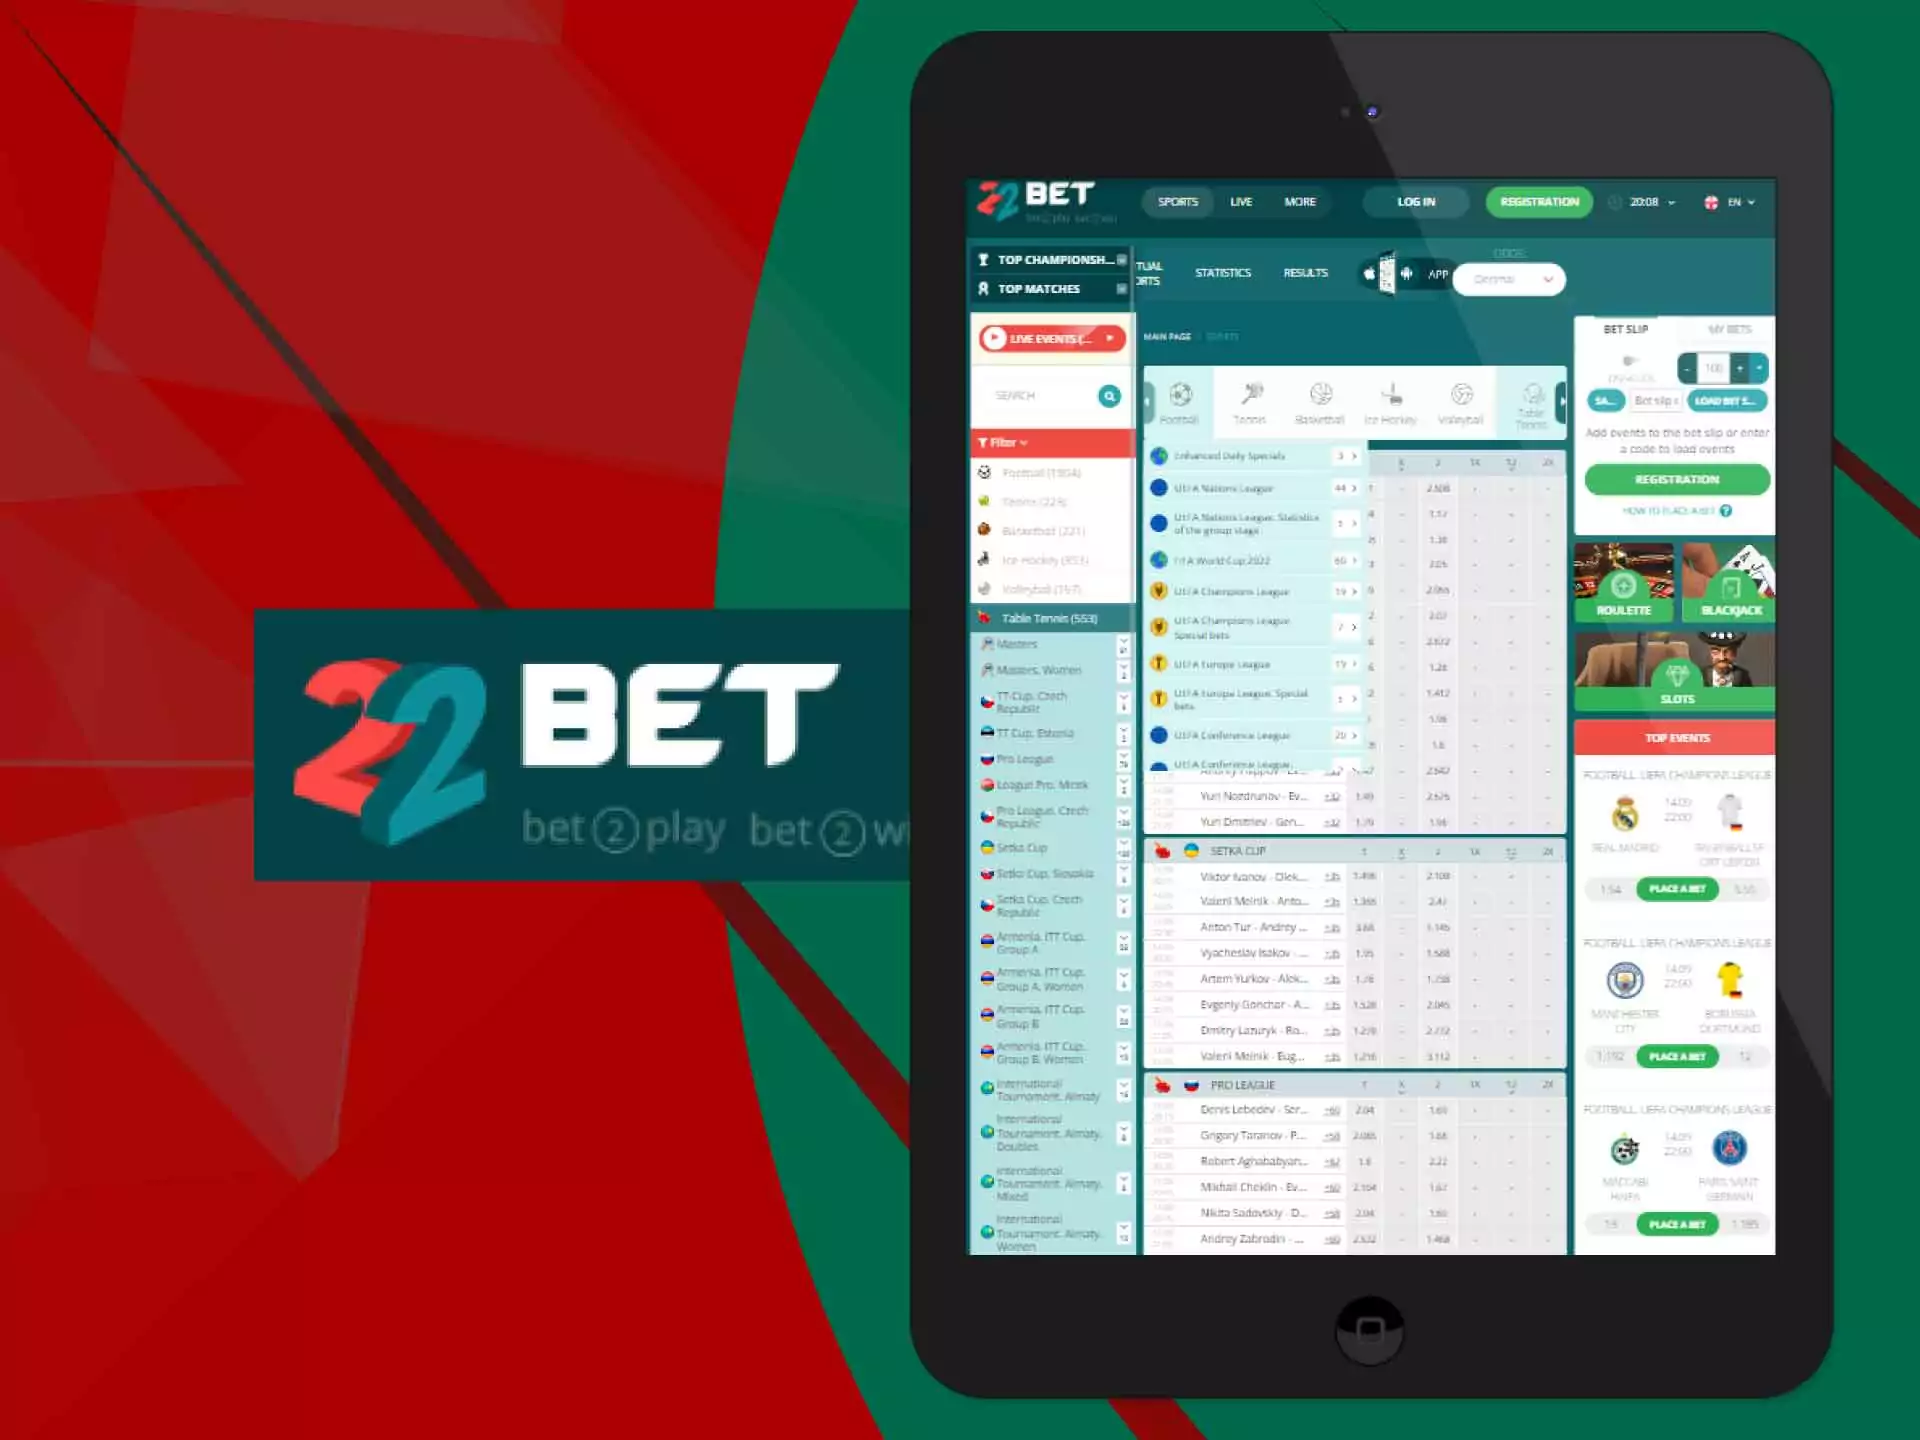 Choose a handicap bet and place it on the results of a match.